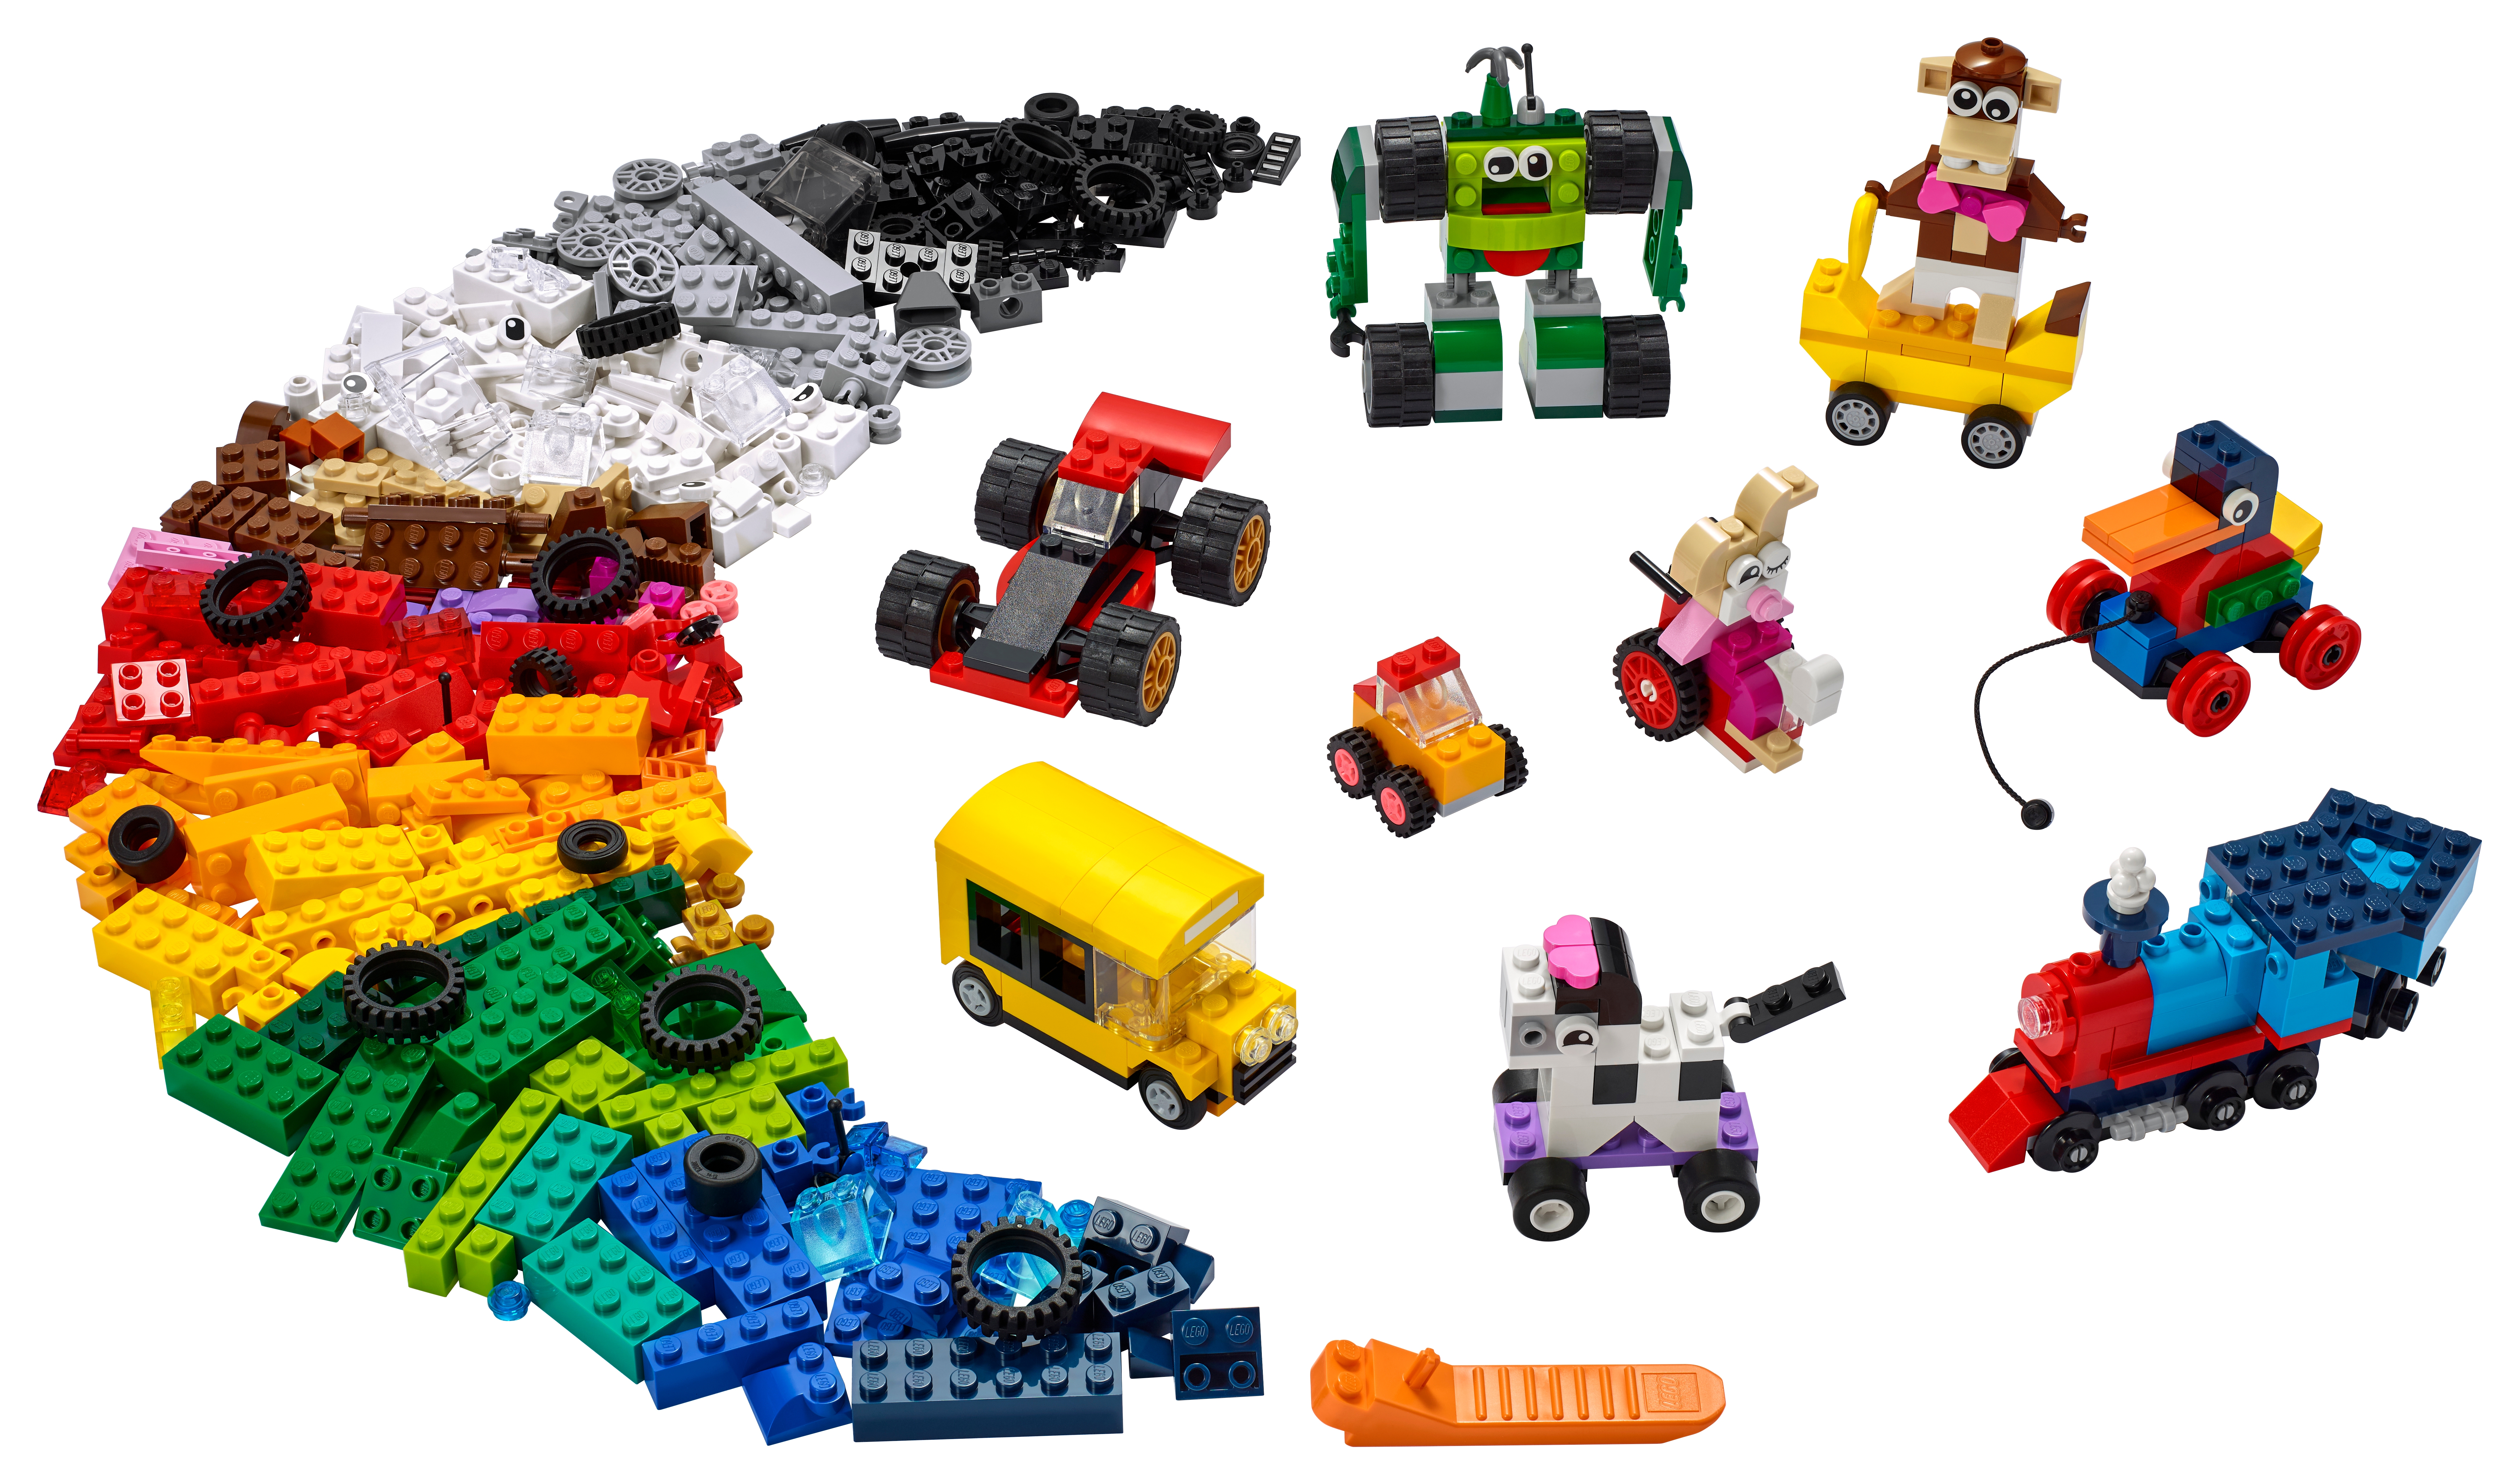 Bricks and Wheels 11014 | Classic | Buy online at Official LEGO® Shop US